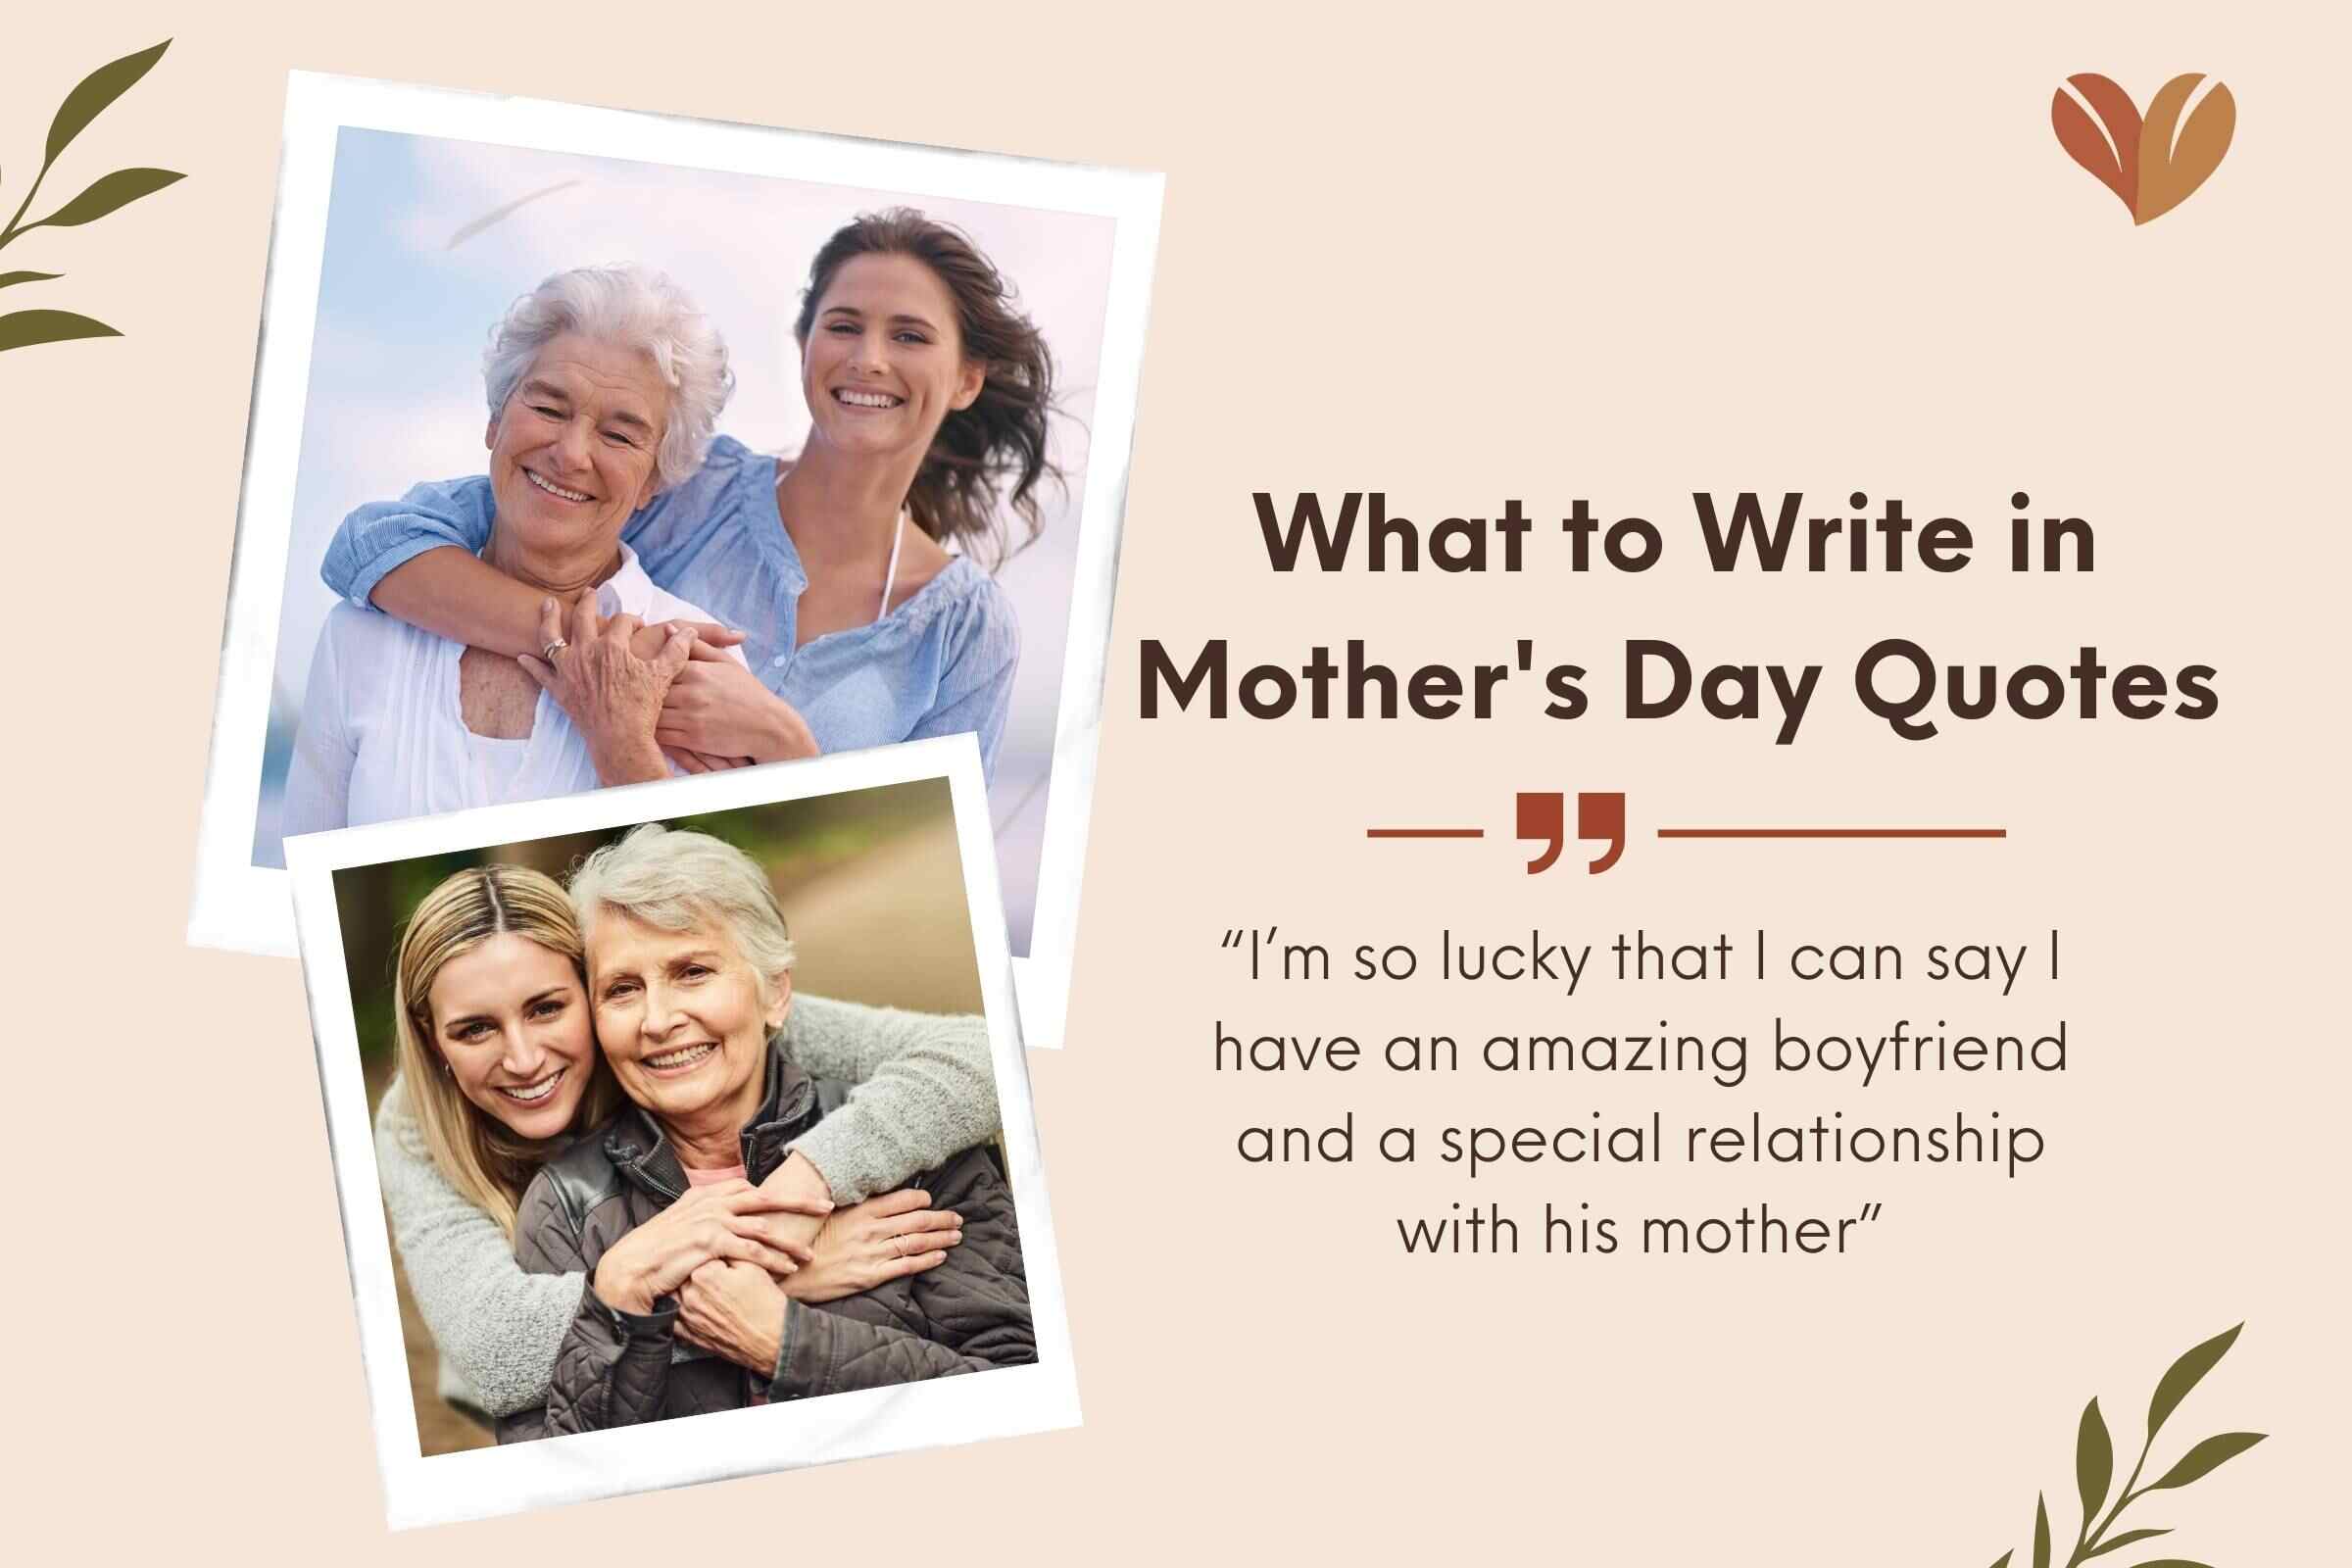 What to Write in Mother's Day Quotes for My Boyfriend's Mom with Thoughtful Greetings